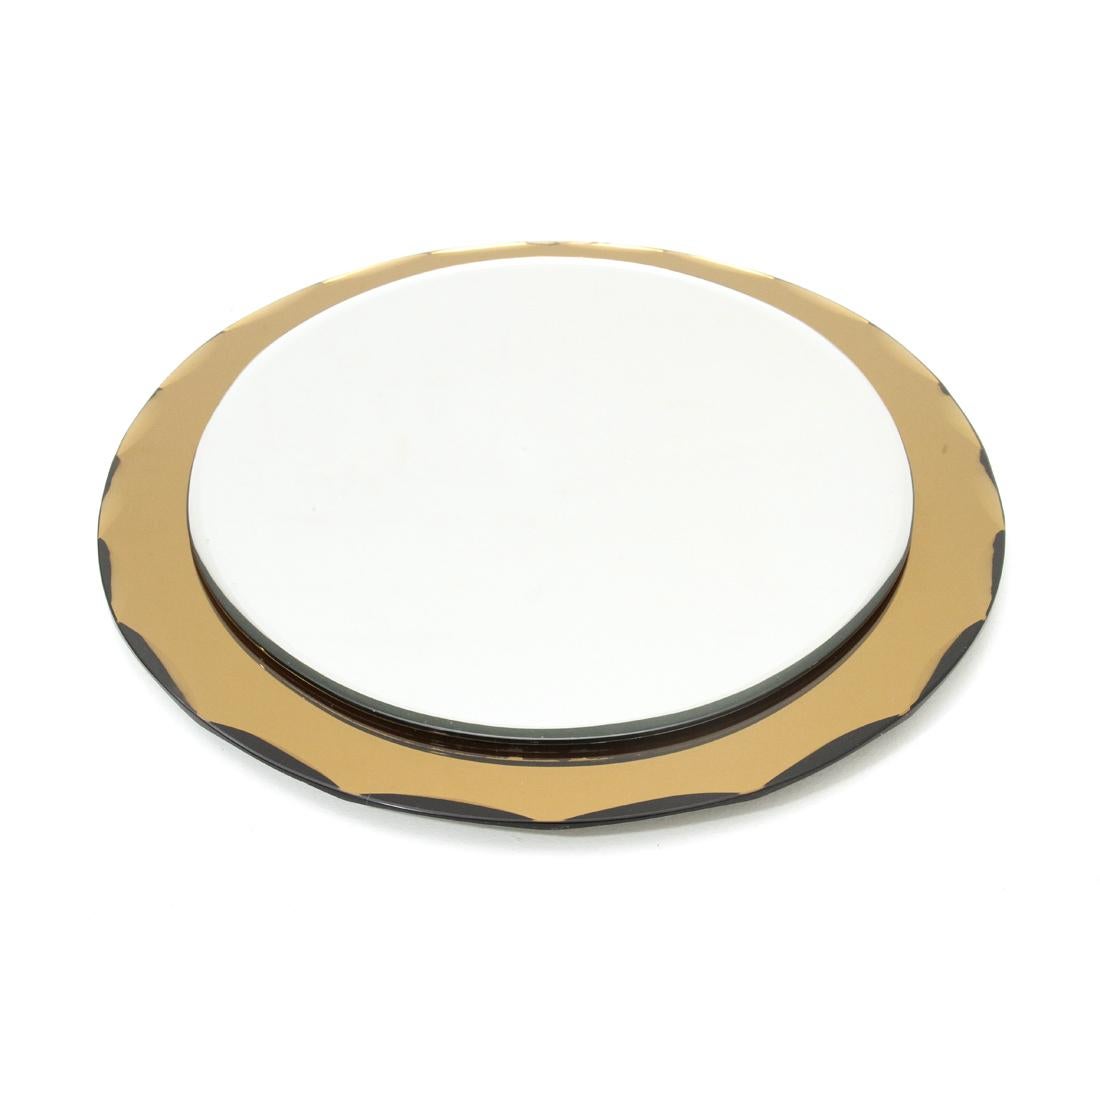 Italian manufacturing mirror produced in the 1970s.
Mirror frame in peach-colored mirrored glass with bevelled edges in wedges.
Circular mirror with bevelled edge.
Good general conditions, some signs and lack of film due to normal use over